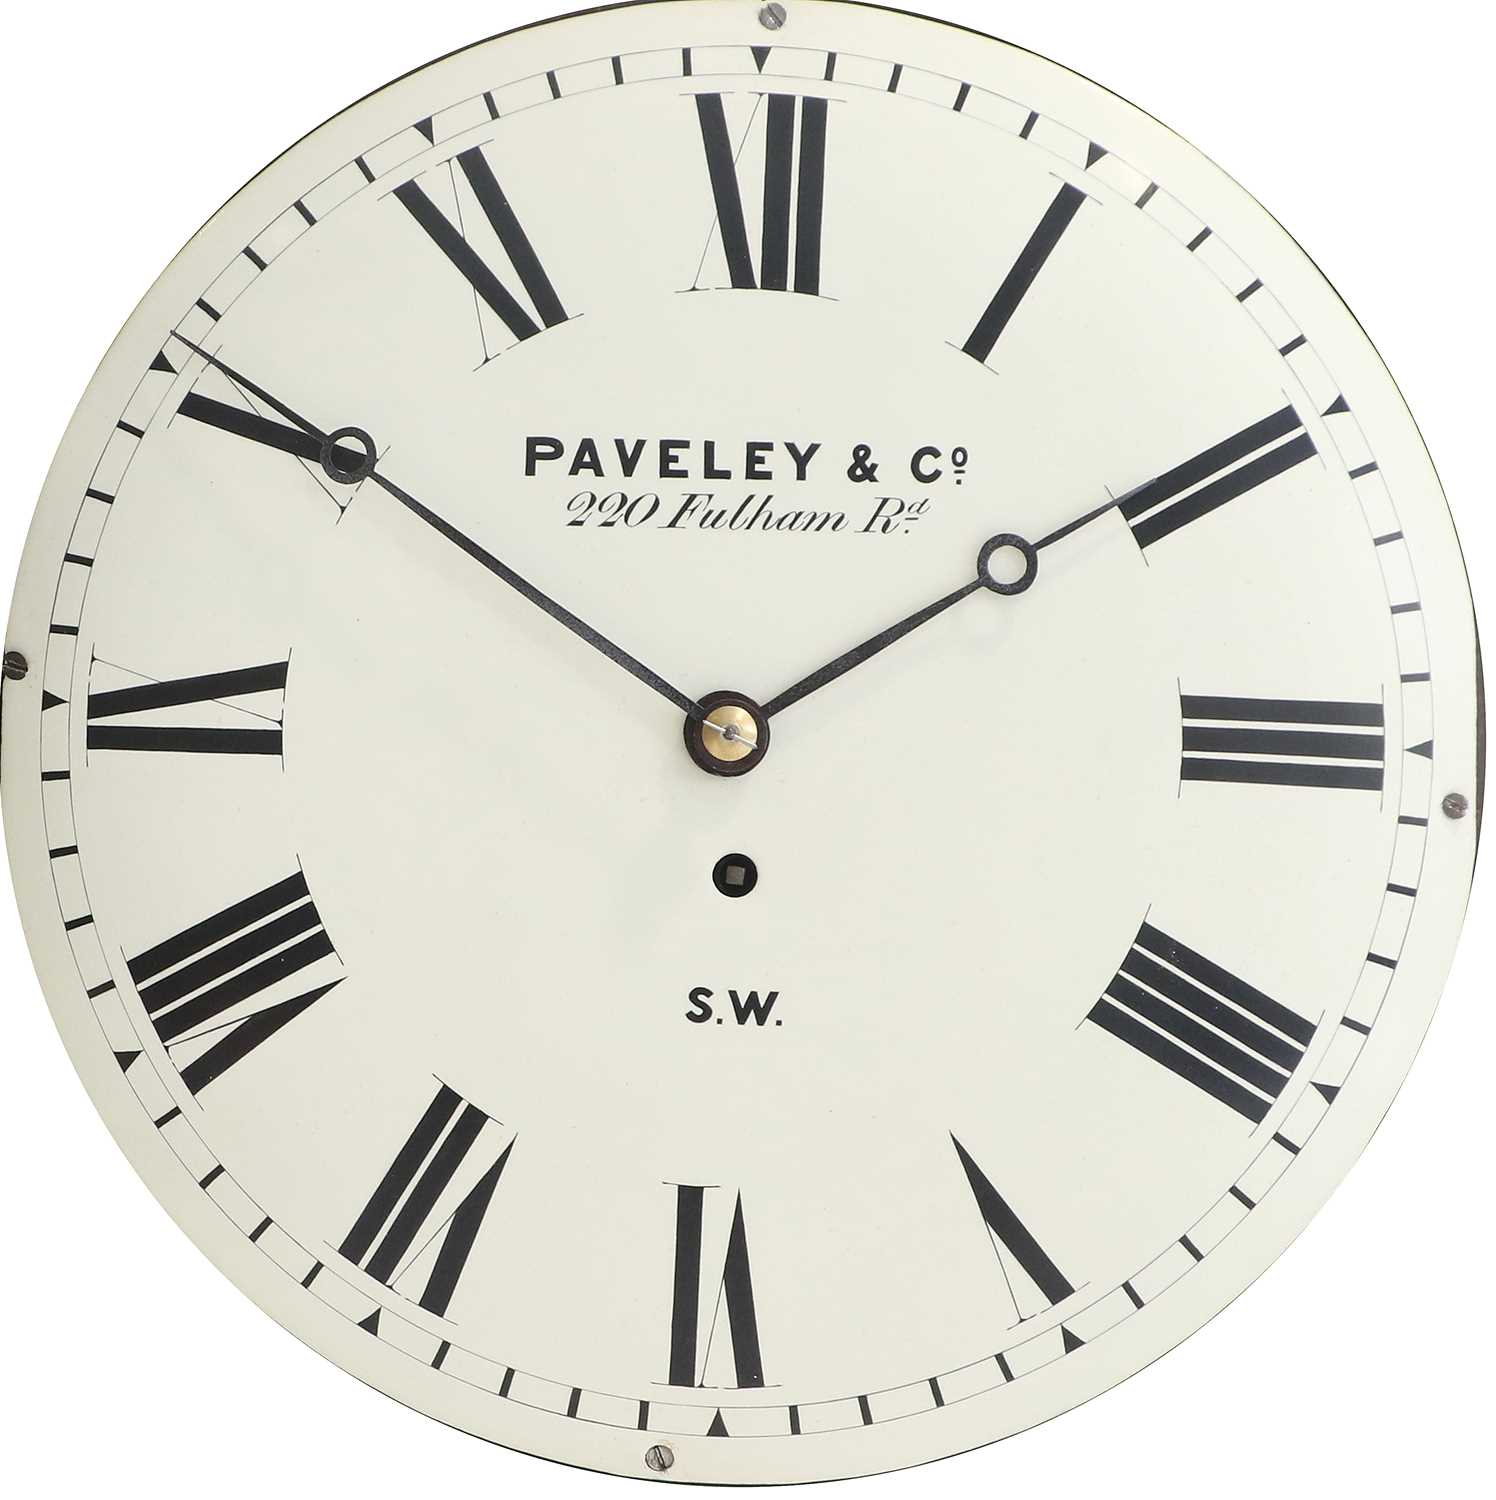 A Mahogany Wall Timepiece, signed Paveley & Co, 220 Fulham Rd, S.W, circa 1860, case with side and - Image 5 of 6